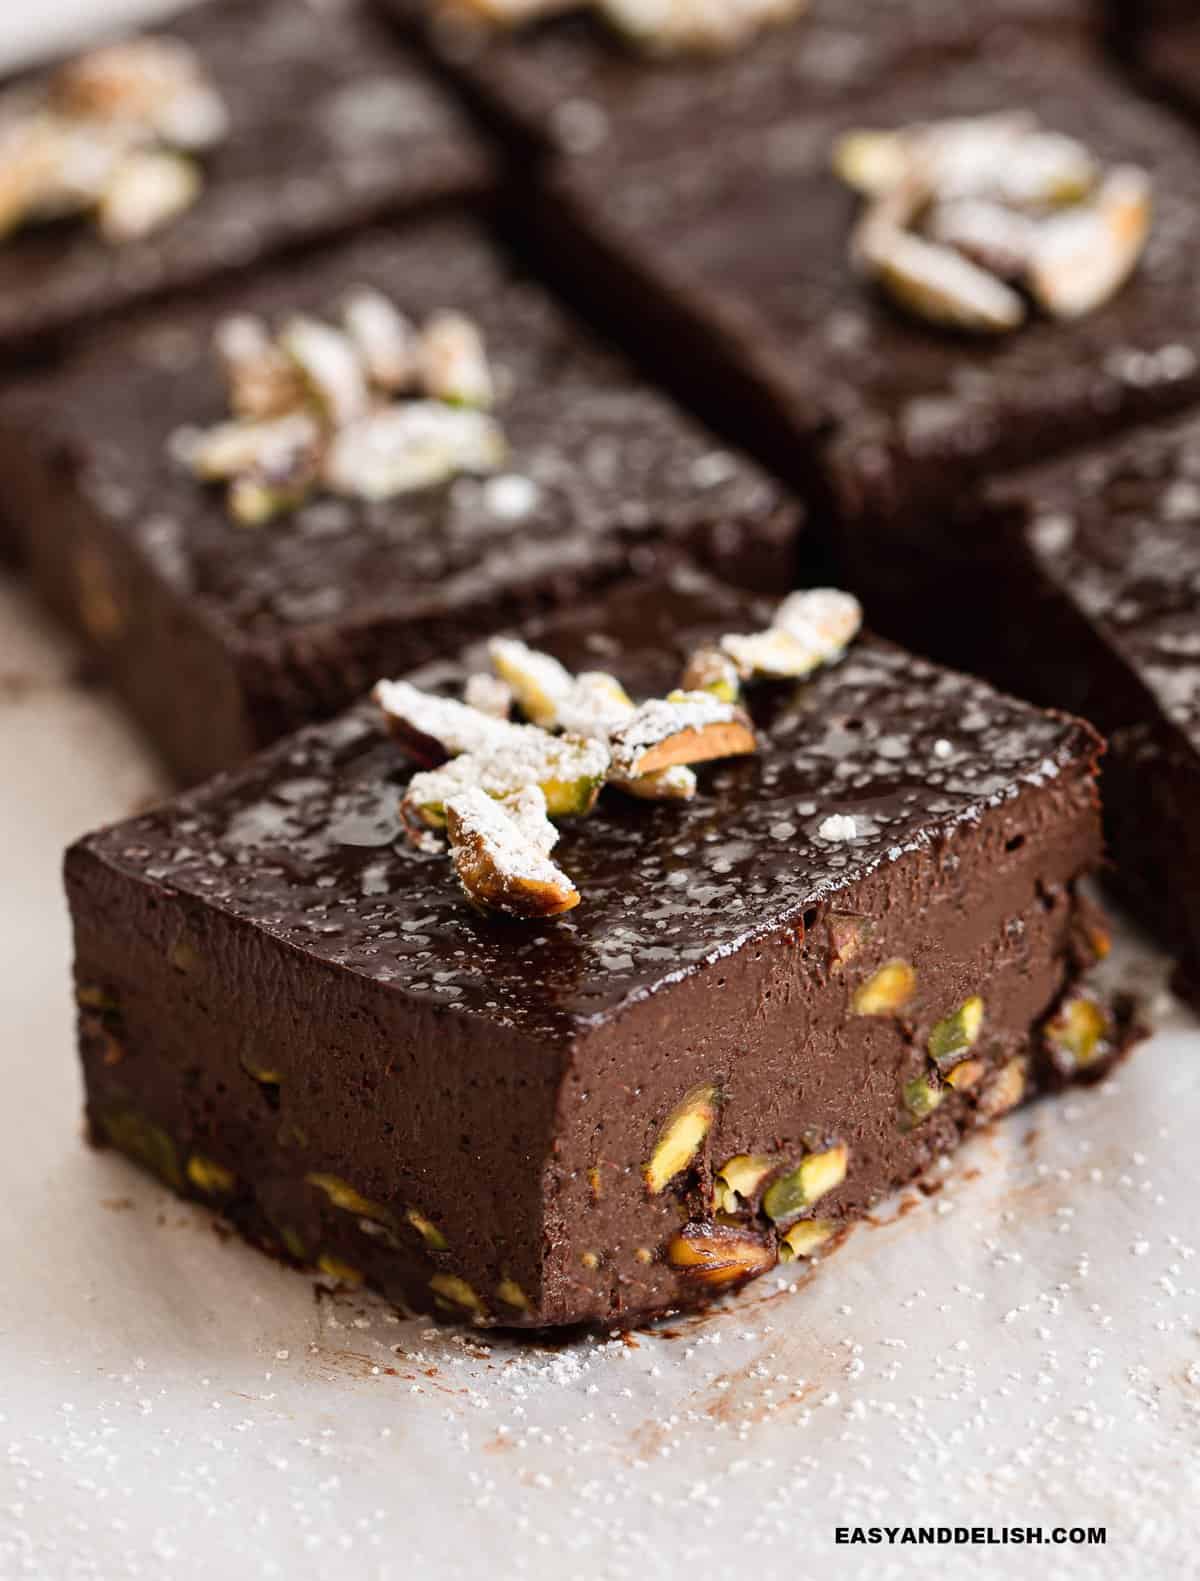 one of several slcies of no bake sugar-free brownies topped with pistachios.